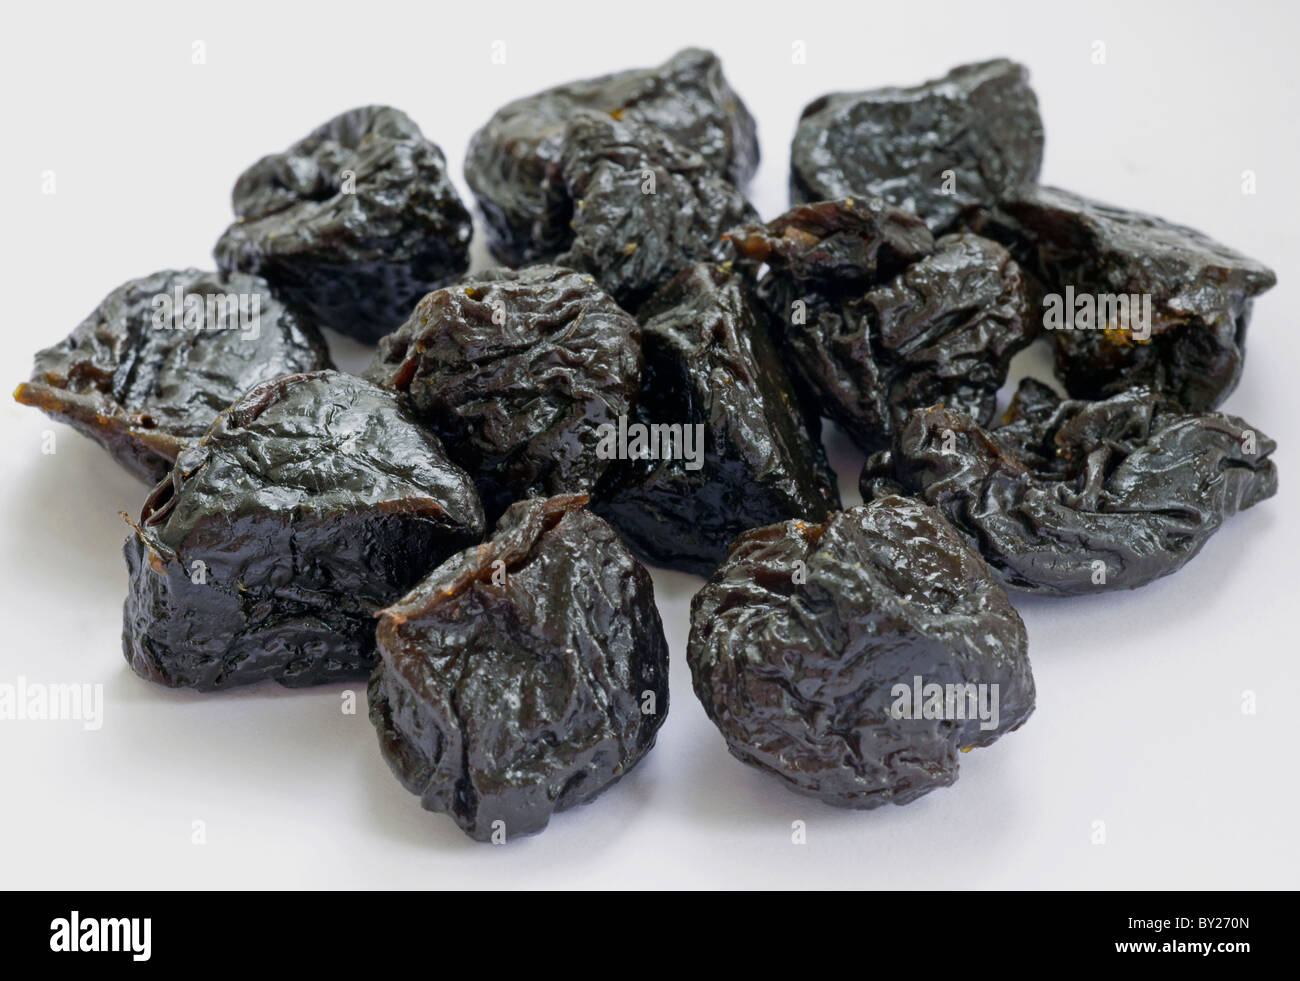 Dried Prunes on a White Background Stock Photo